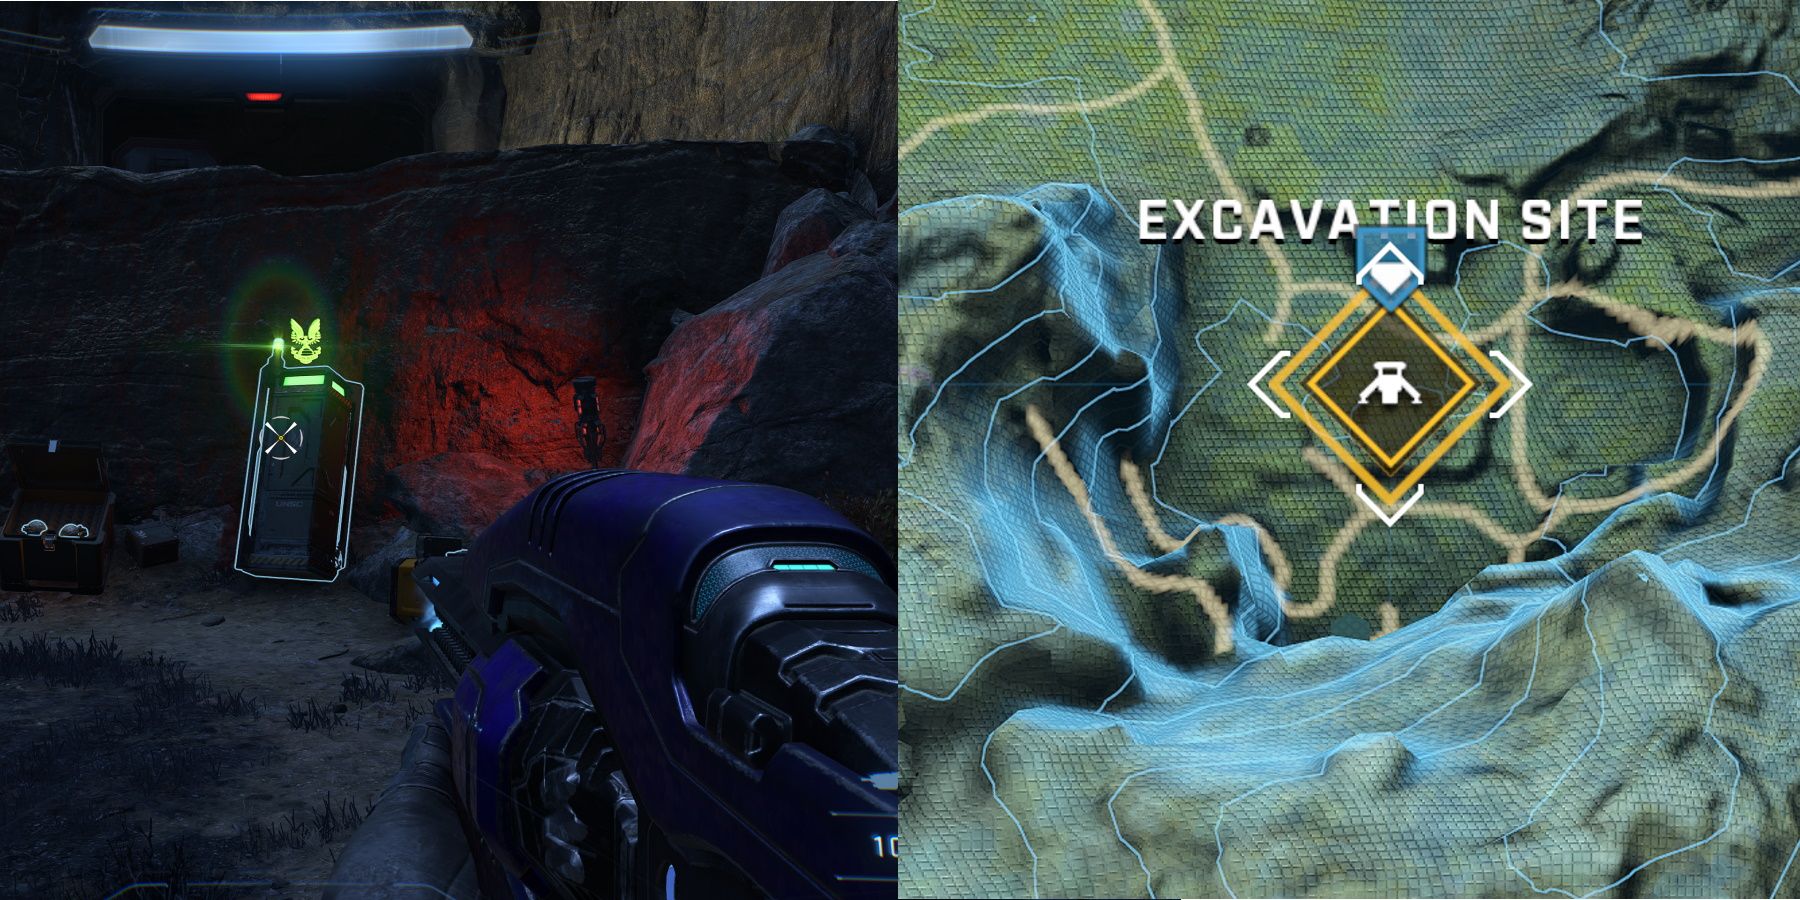 Halo Infinite Excavation Site Mjolnir Armor and map screen